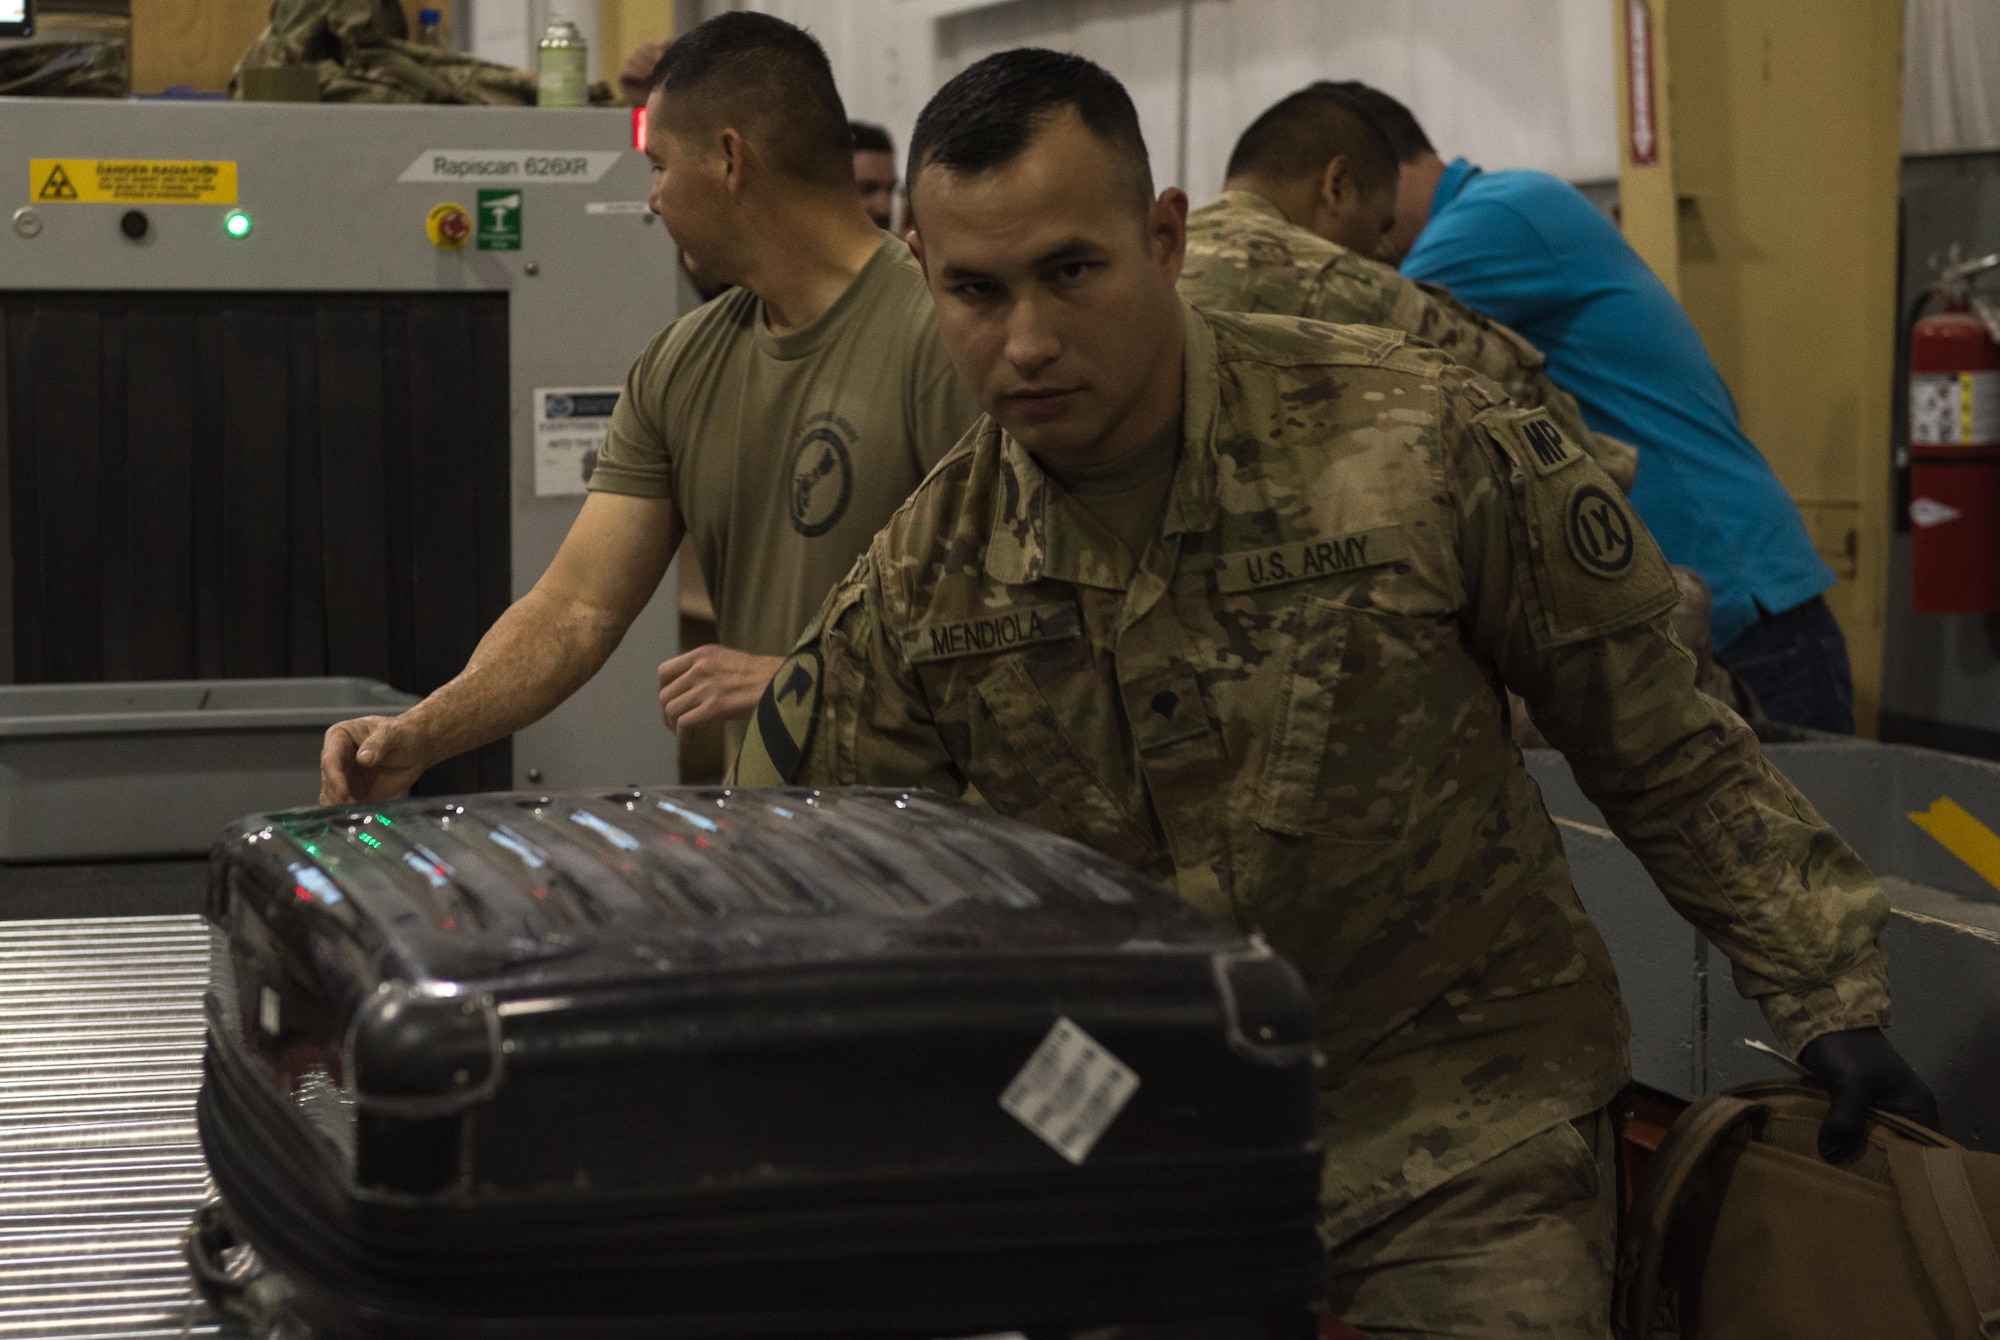 U.S. Army Spc. Adam Mendiola, 368th Military Police Company, pushes a piece of luggage after inspection at Bagram Airfield, Afghanistan, April 30, 2017. The customs office is responsible for inspecting personnel and cargo leaving Afghanistan and the Central Command area of responsibility. (U.S. Air Force photo by Staff Sgt. Benjamin Gonsier)  